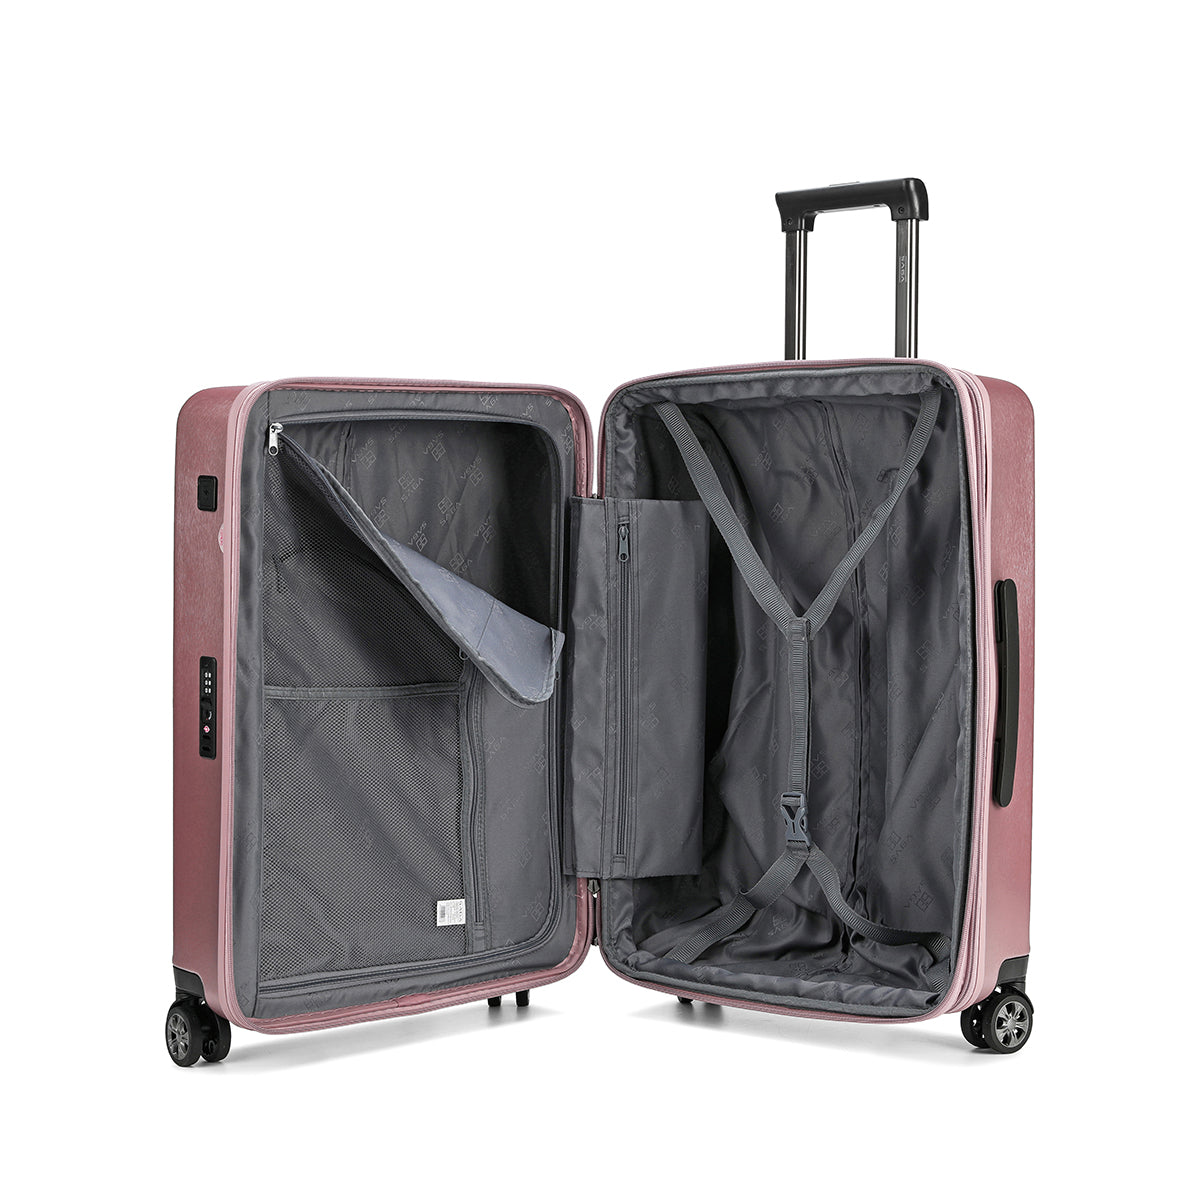 Fashionable and durable travel bags made of 100% durable polycarbonate in several sizes and colors